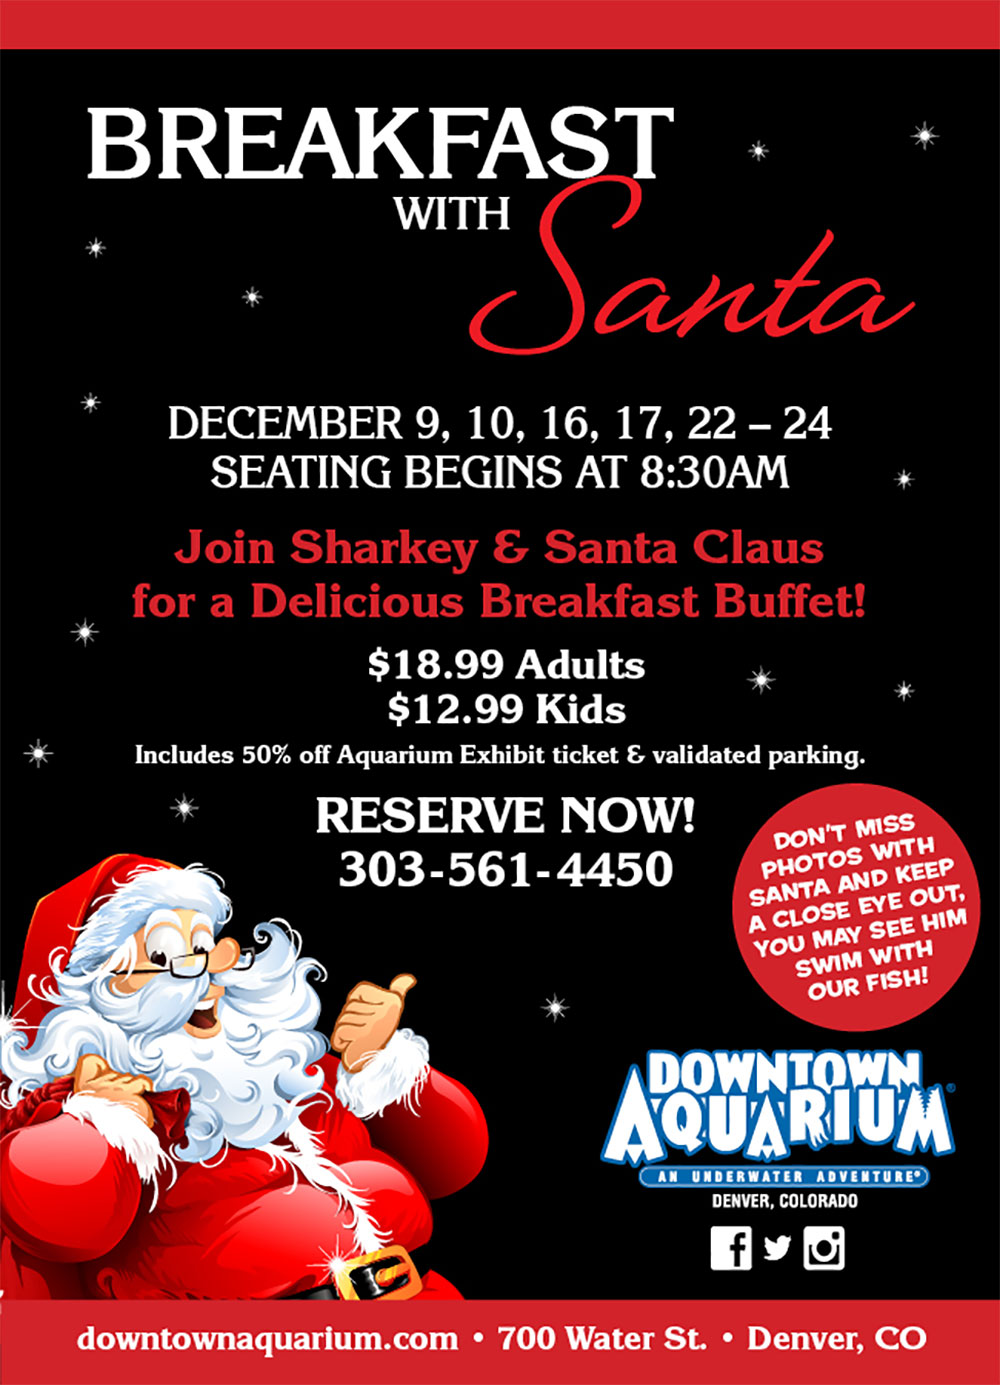 Breakfast with Santa Reserve Now!